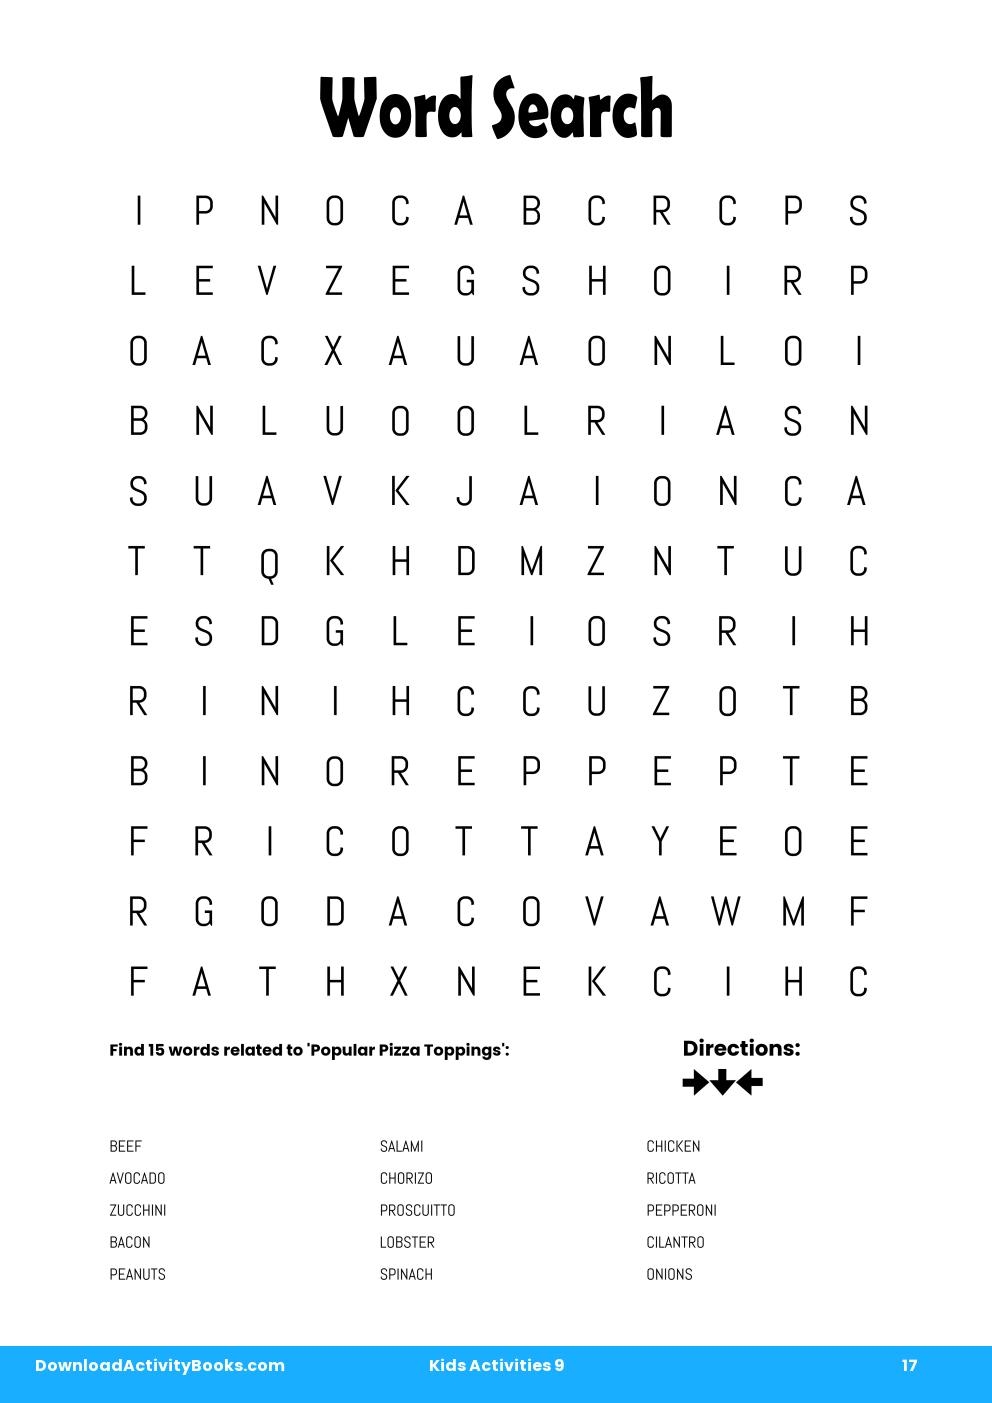 Word Search in Kids Activities 9